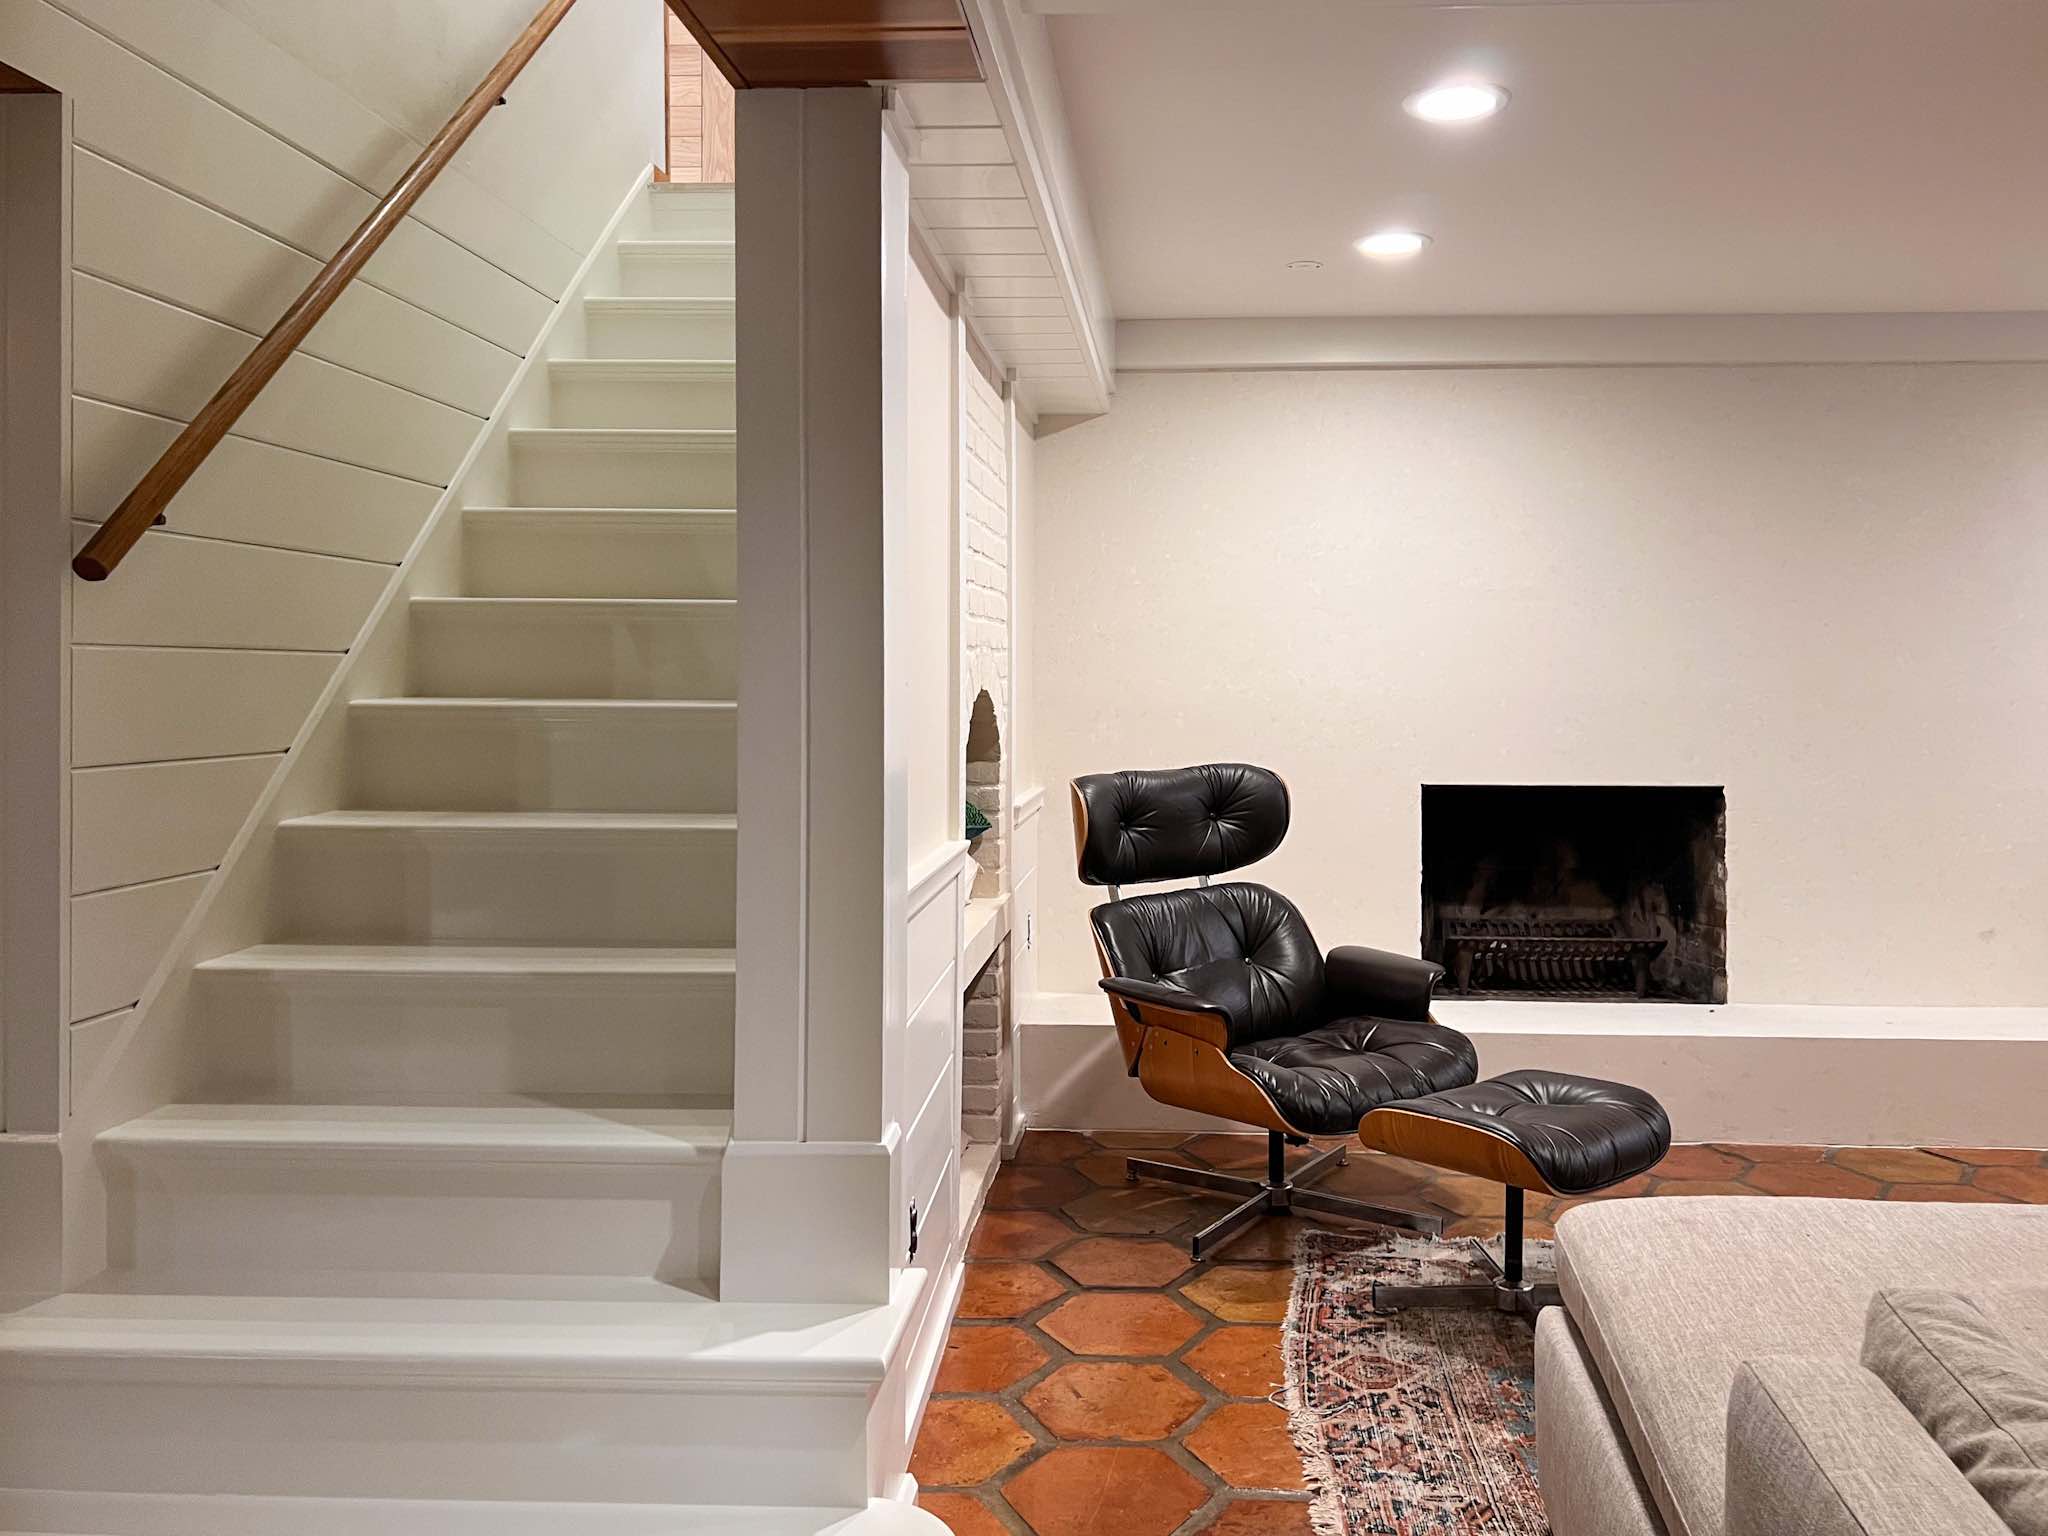 How We Transformed Our Basement Stairs With a Fresh Coat of Paint